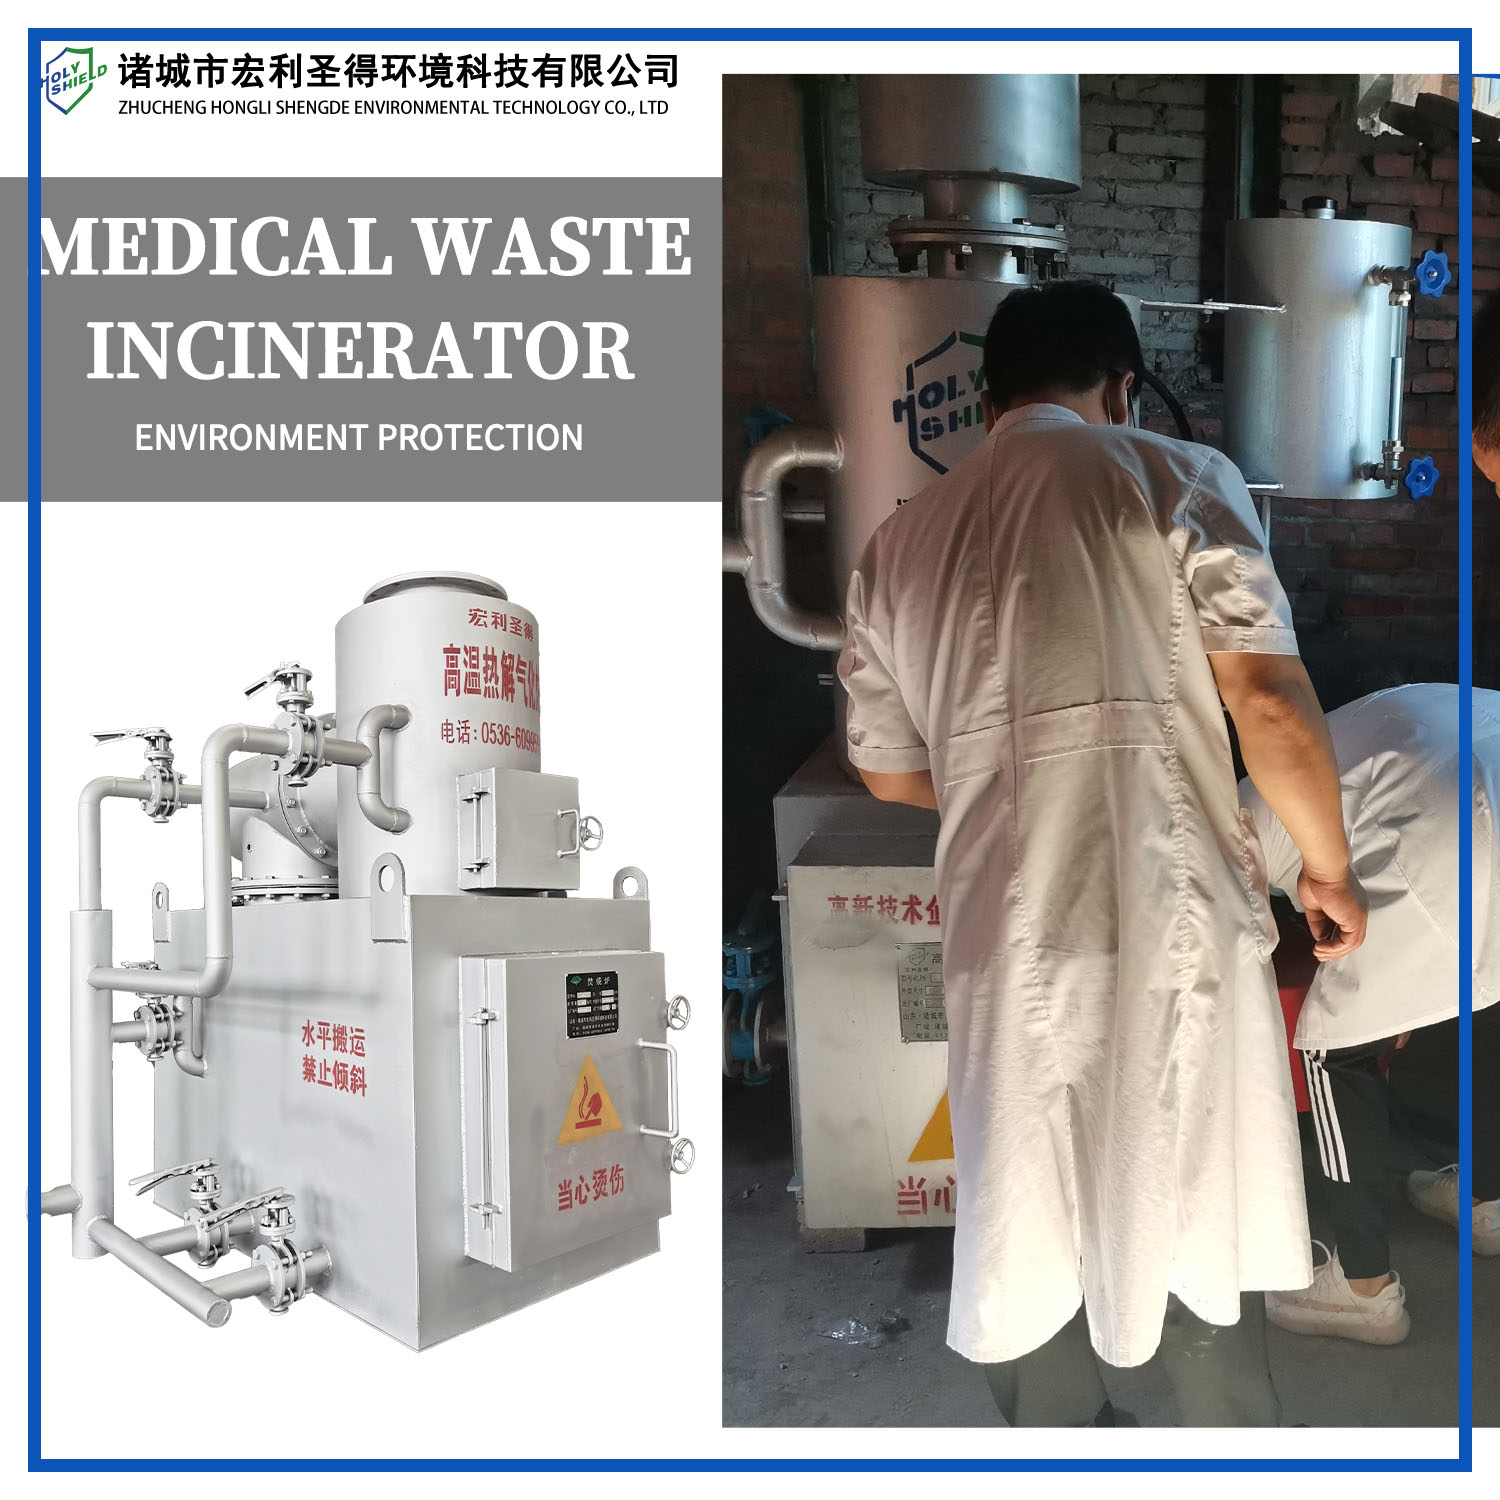 Medical waste incinerators promote efficient and environmentally friendly treatment of medical waste